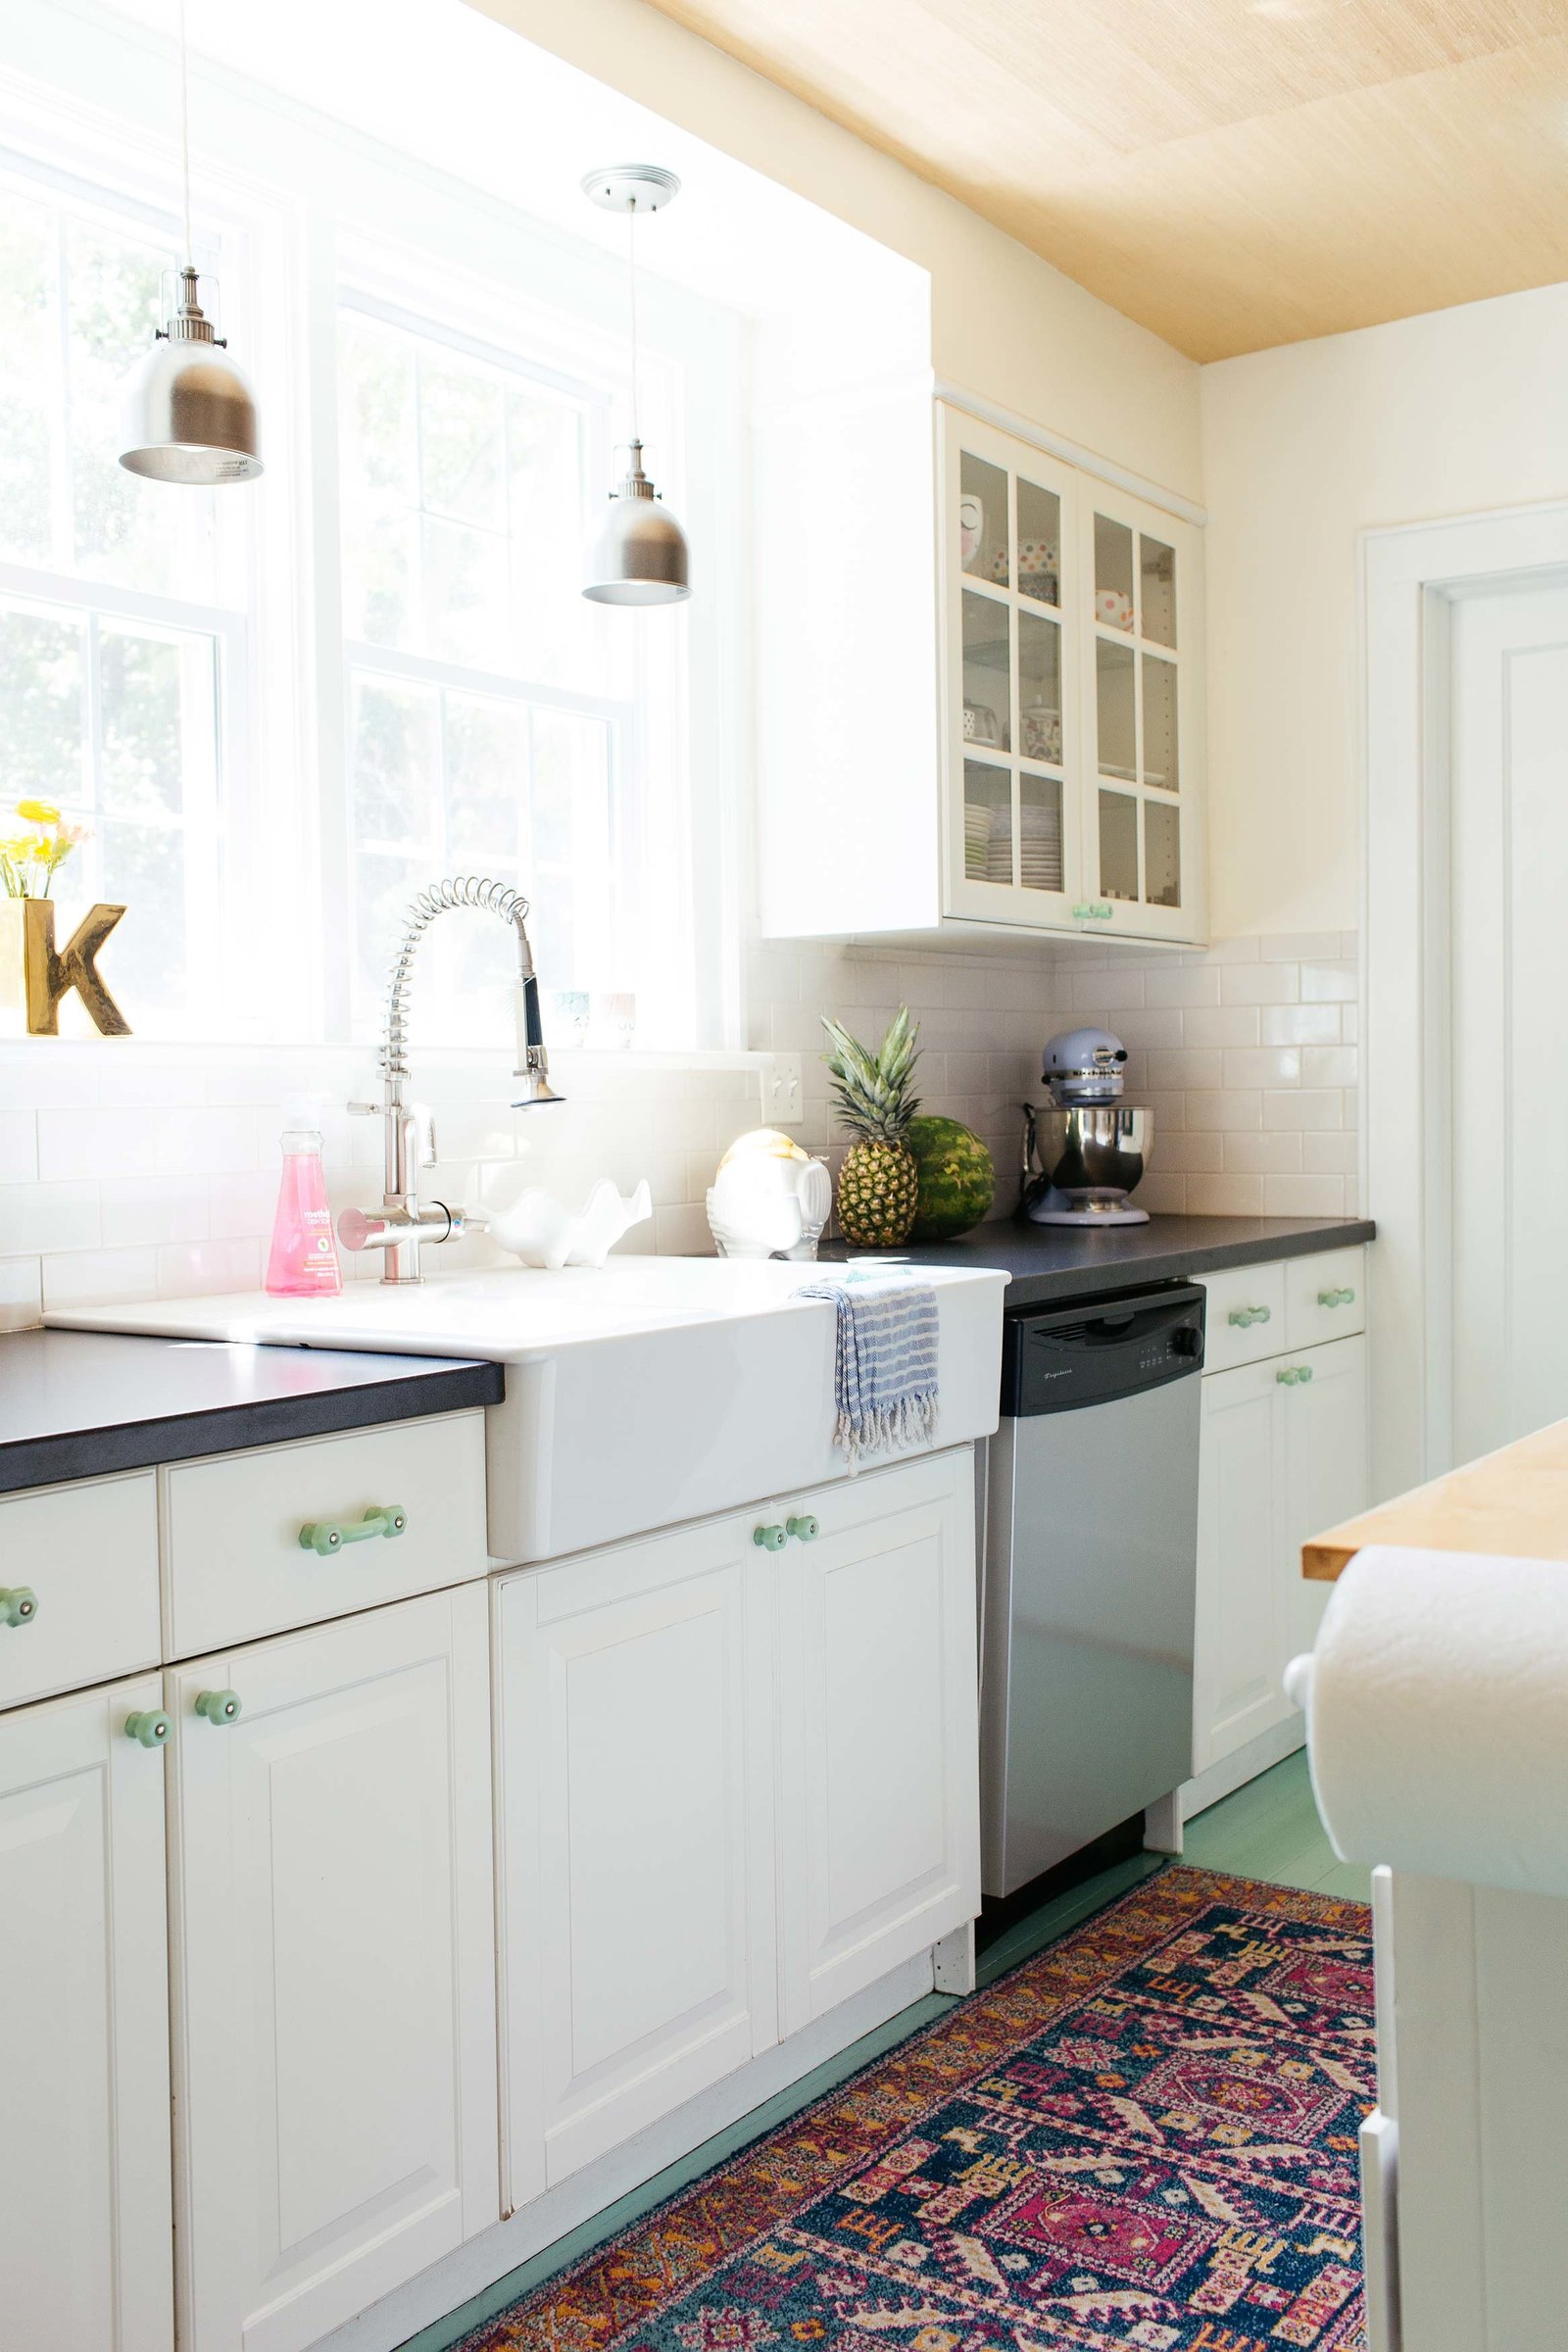 A small kitchen with mint floors and white cabinets.